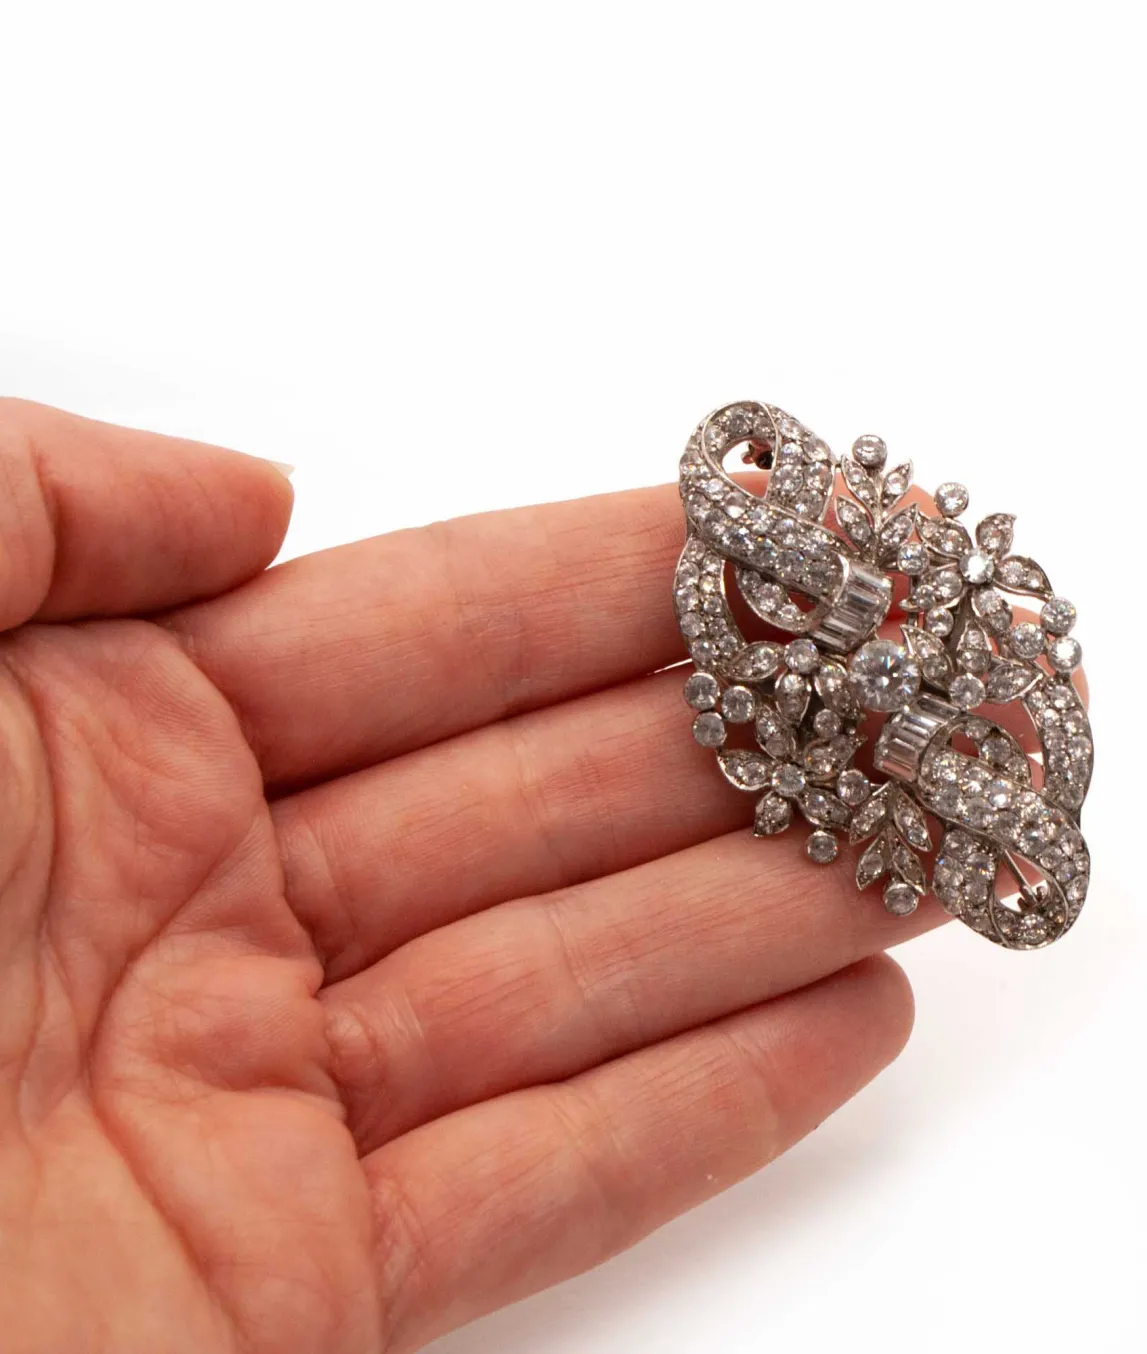 Double clip clear crystal brooch held in a hand